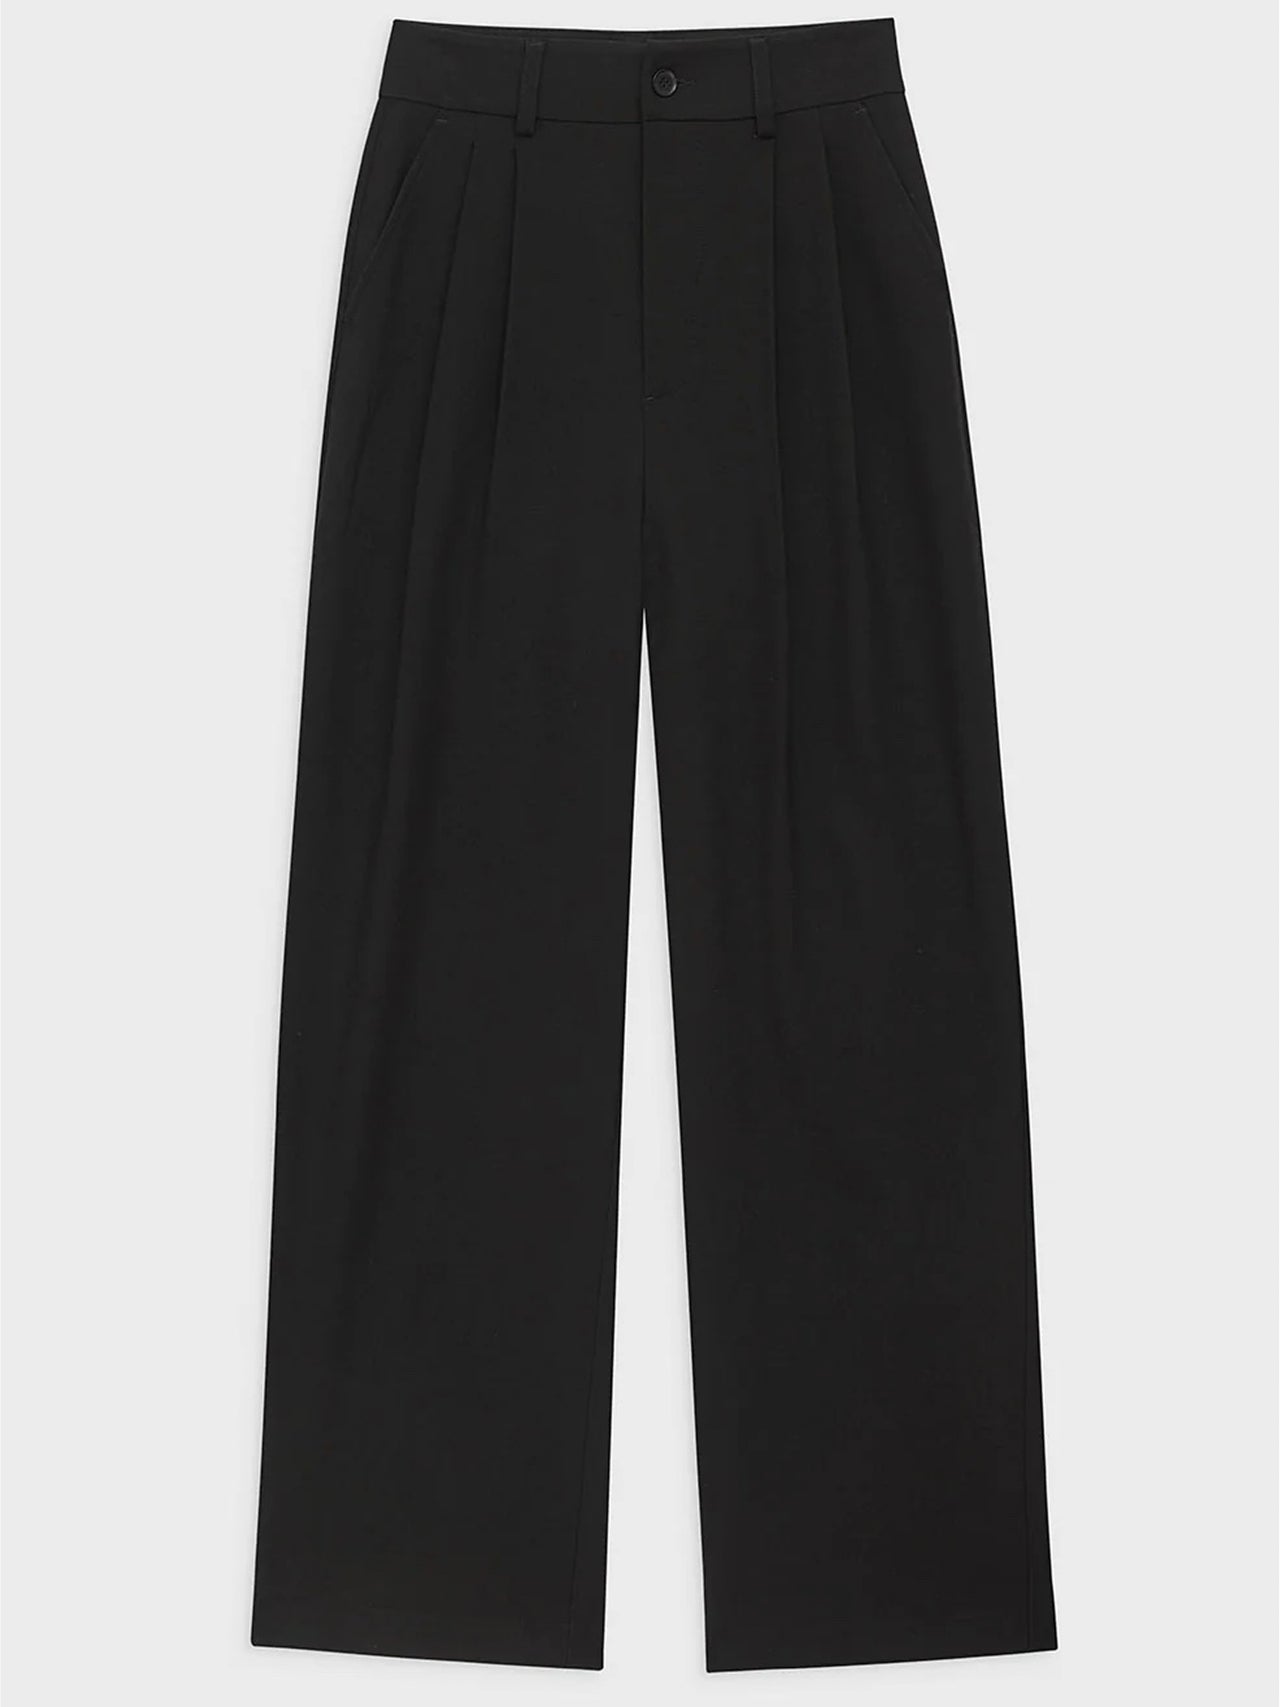 the-lair-Anine-Bing-Carrie-Pant-Black-Twill